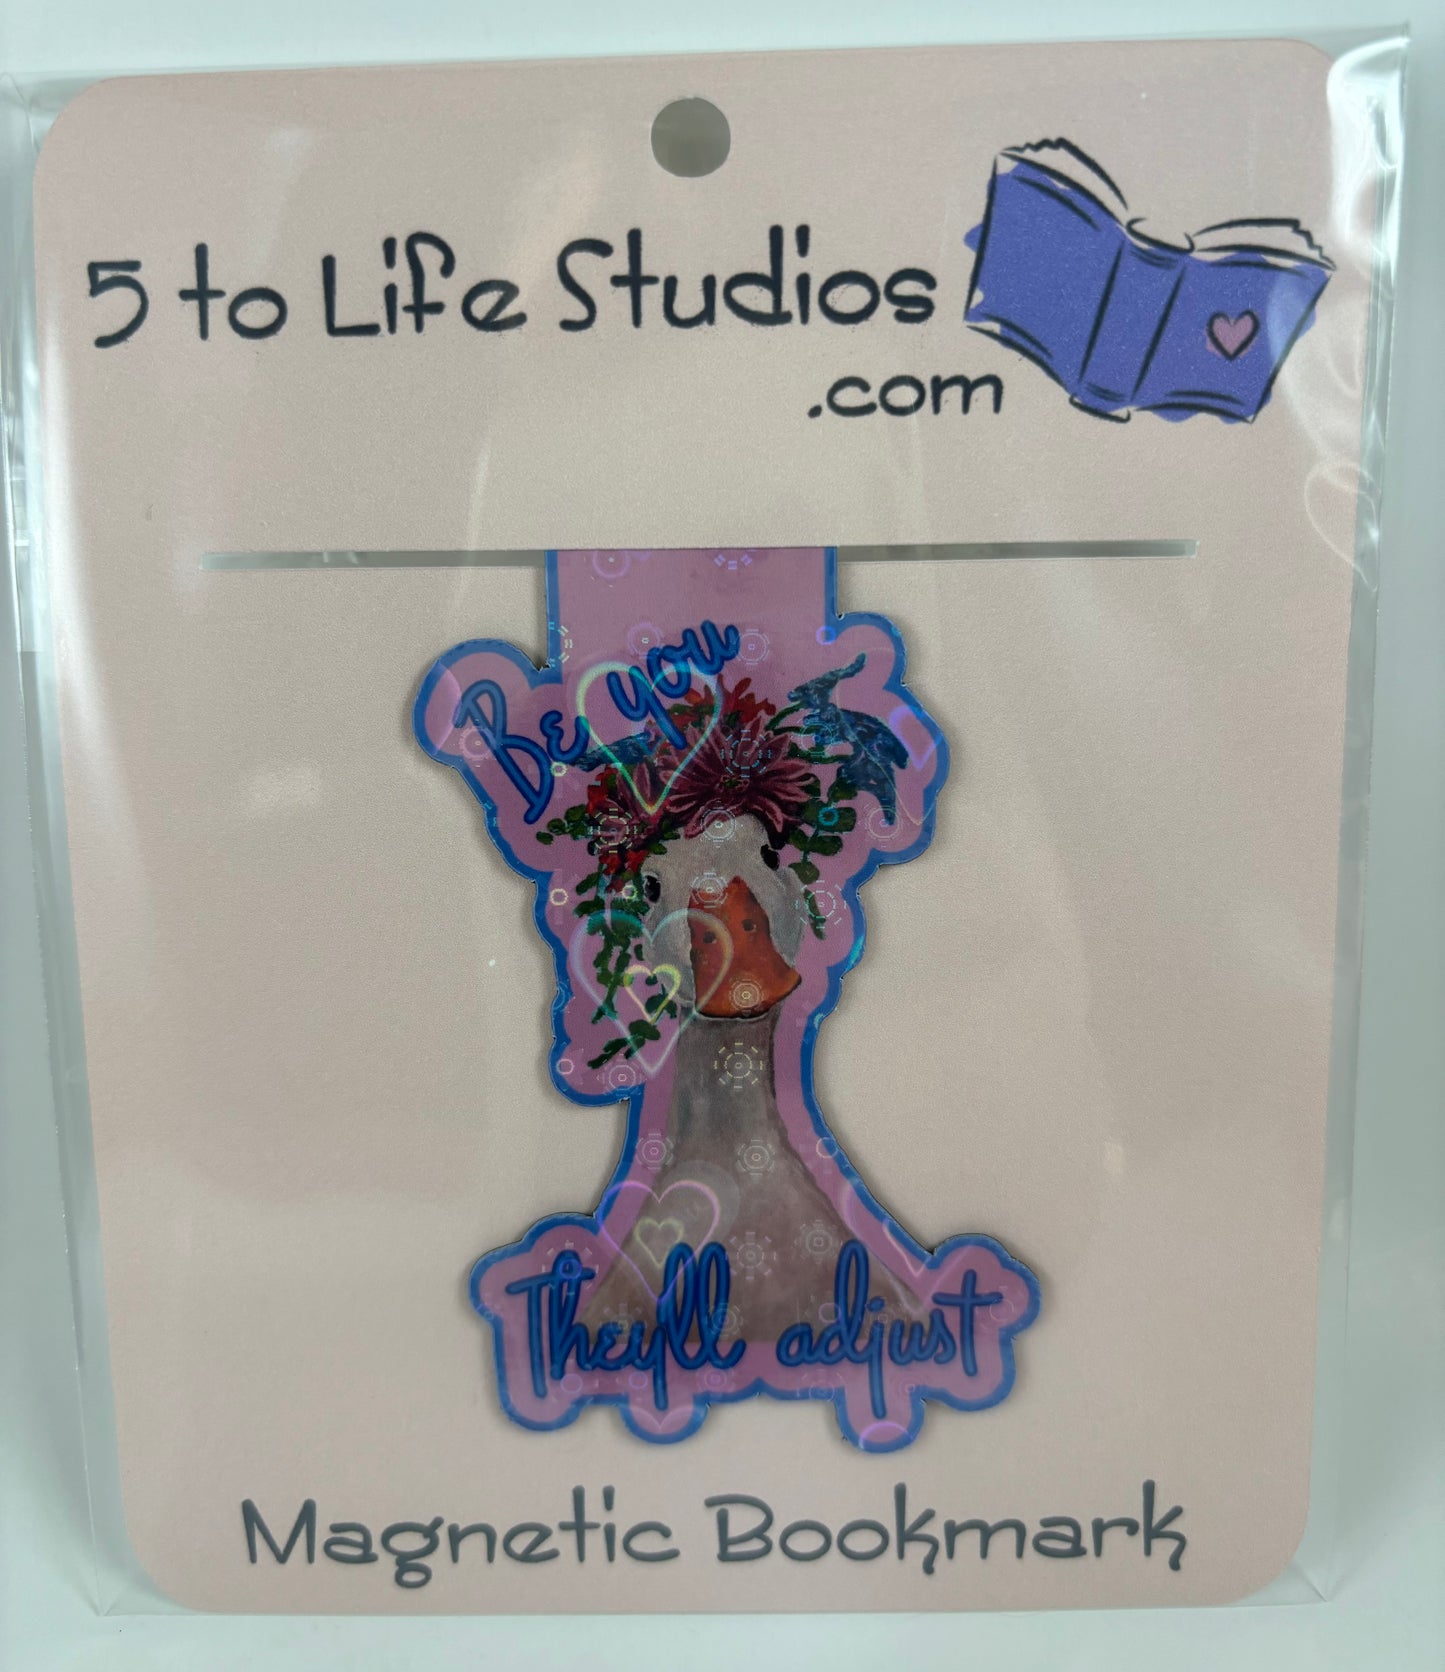 Slimclick Magnetic Bookmark "Be you, they'll adjust"